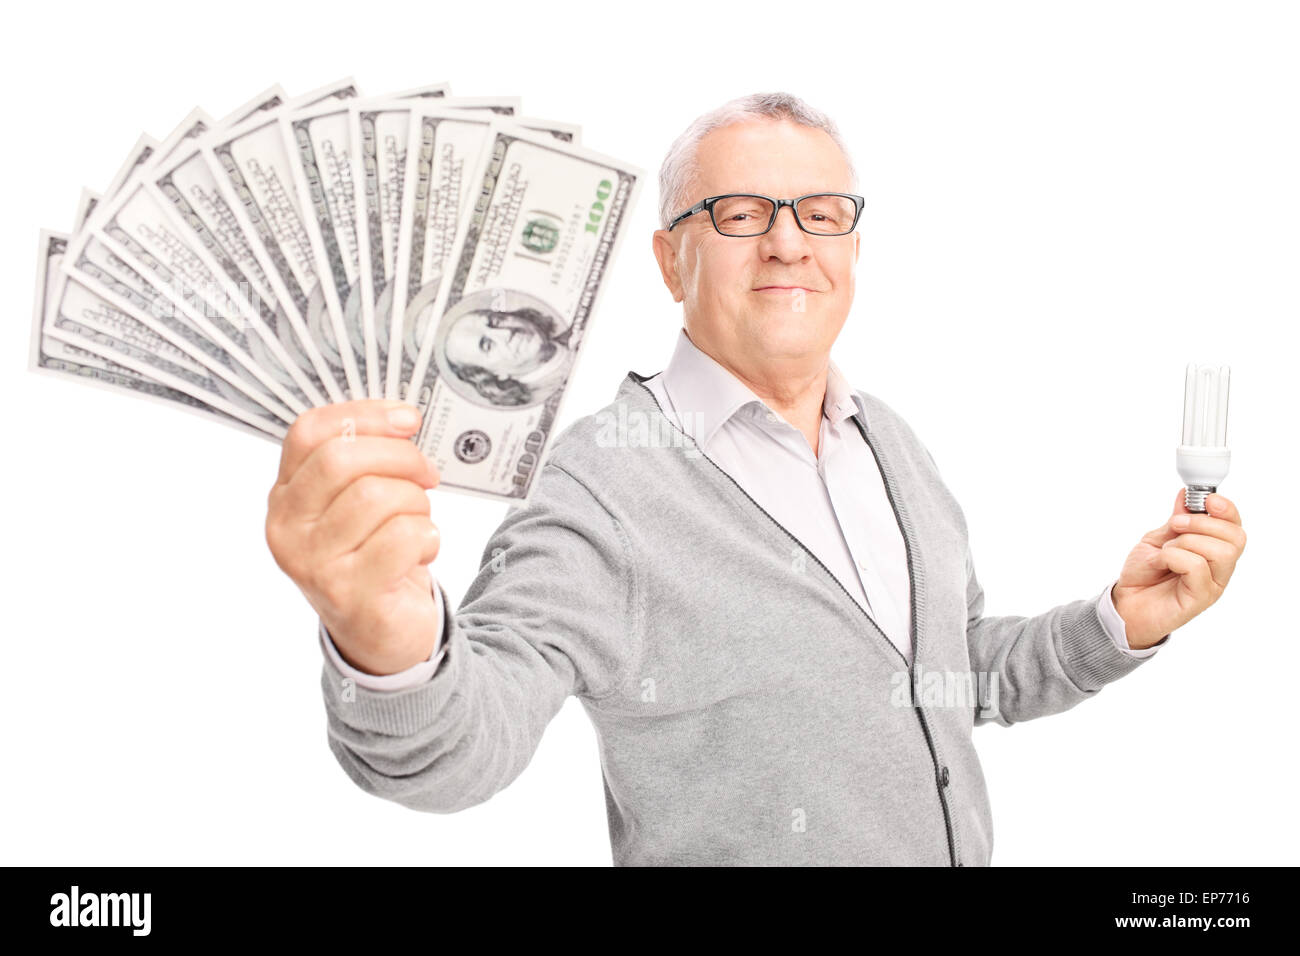 Economic senior holding an energy efficient light bulb and a stack of money isolated on white background Stock Photo